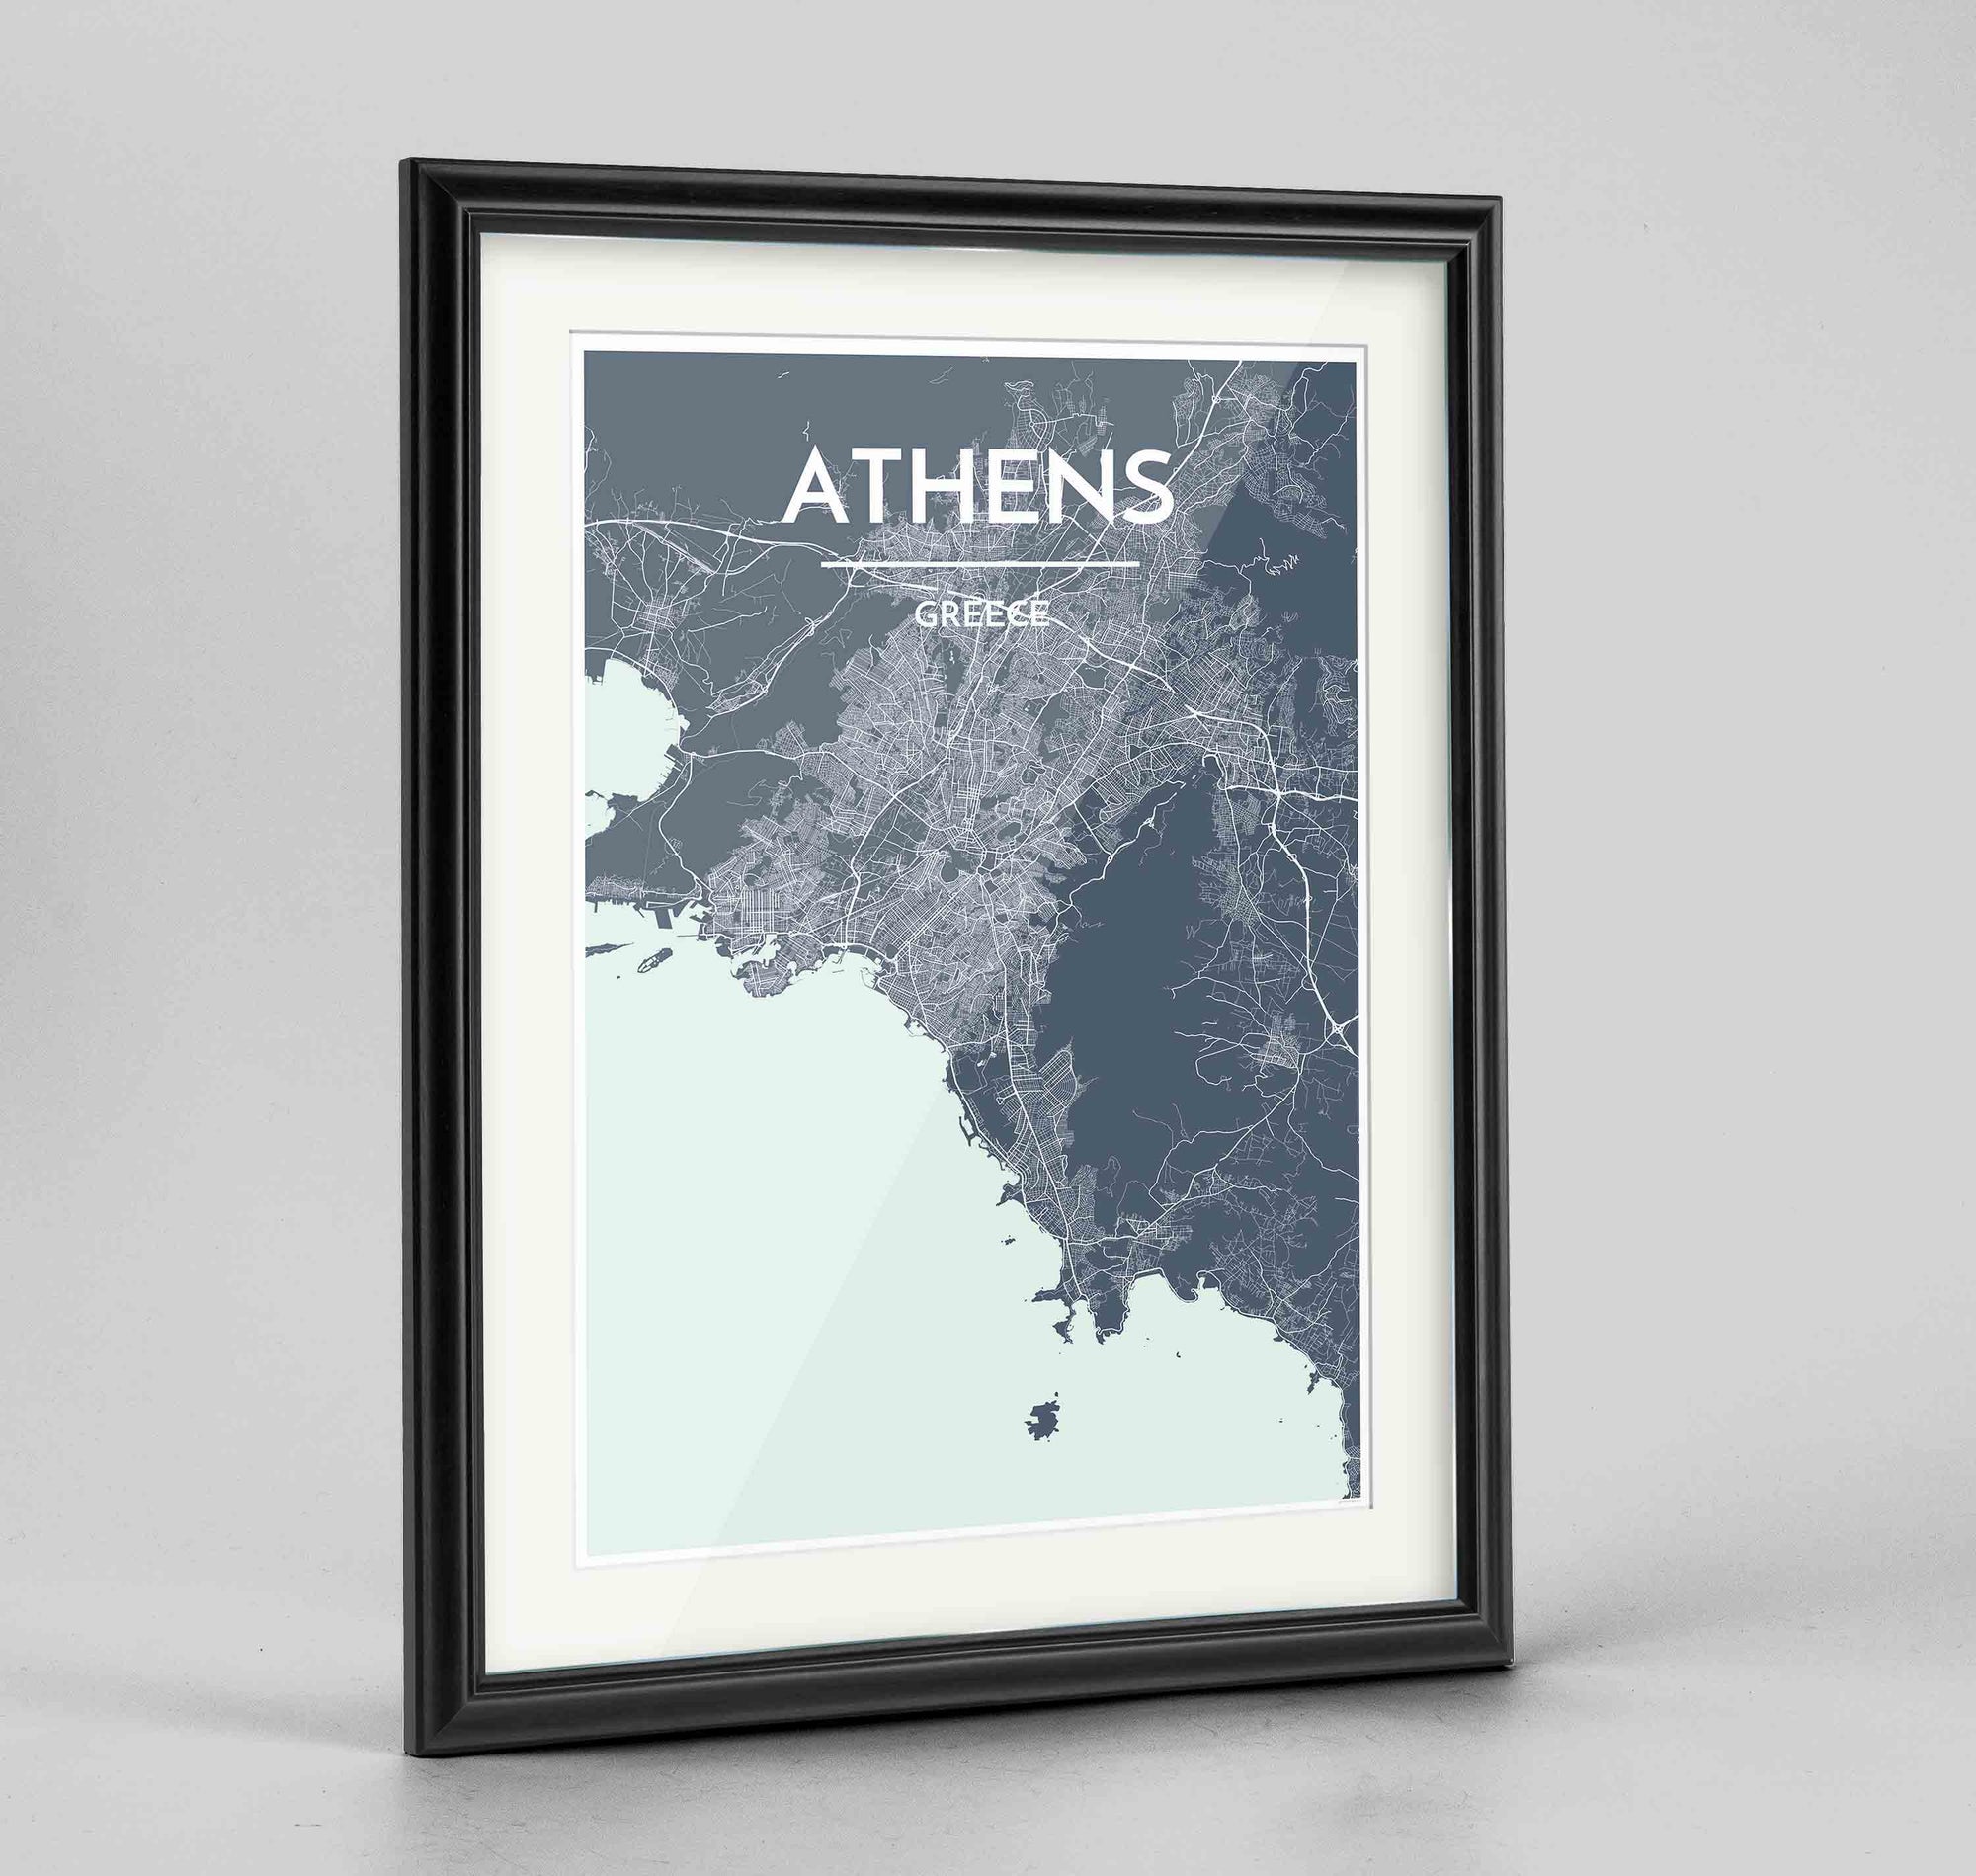 Framed Athens Map Art Print 24x36" Traditional Black frame Point Two Design Group